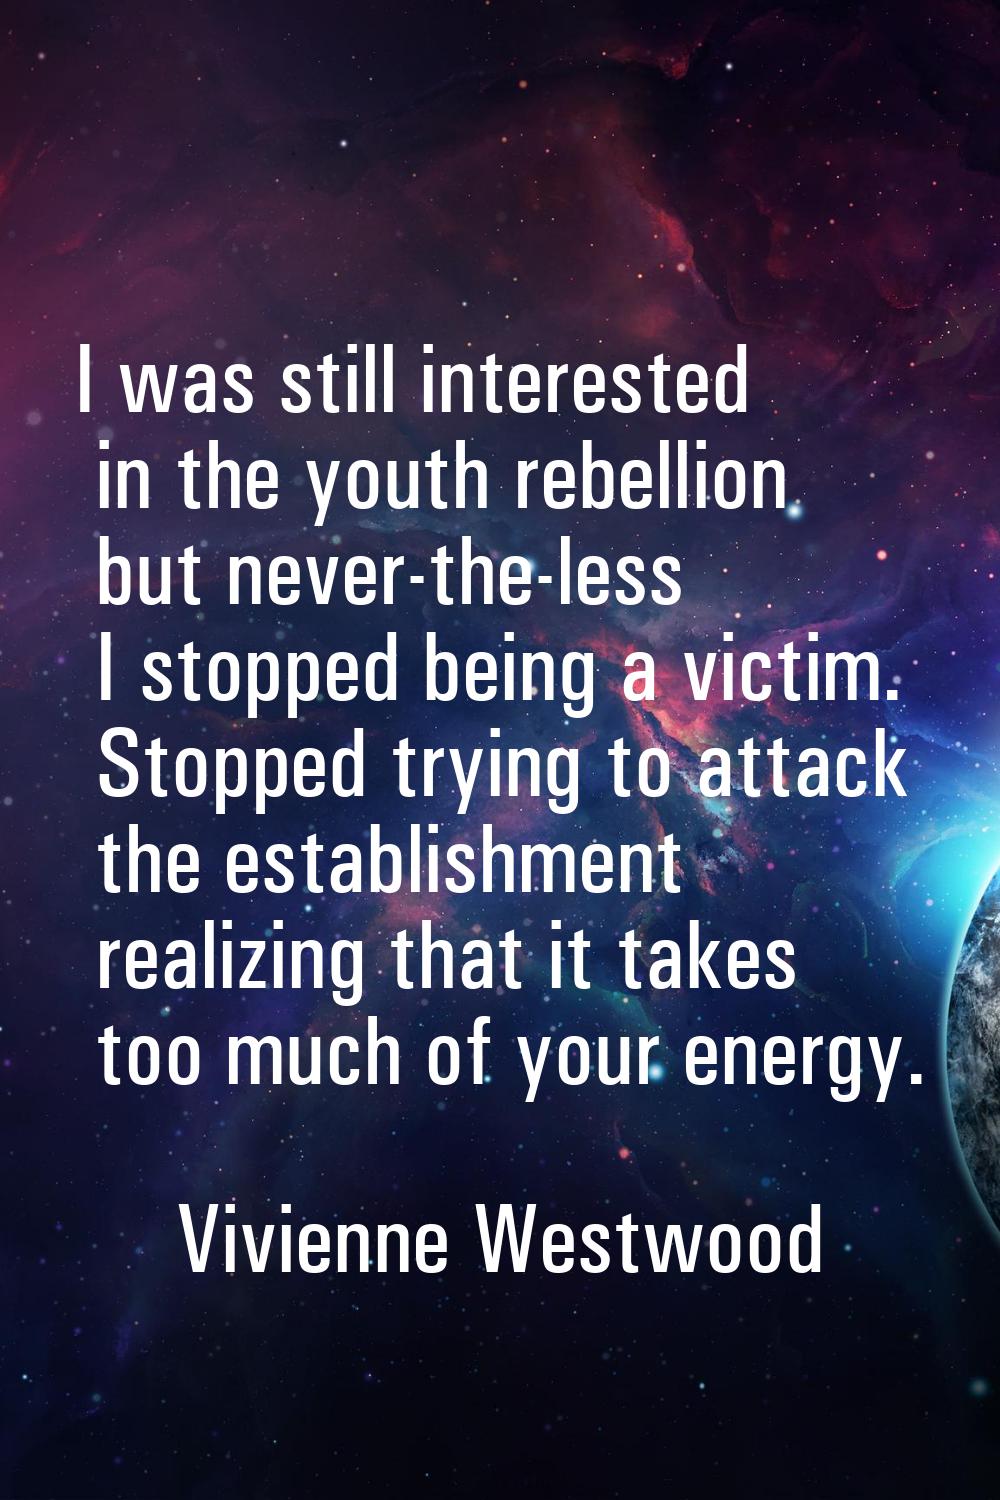 I was still interested in the youth rebellion but never-the-less I stopped being a victim. Stopped 